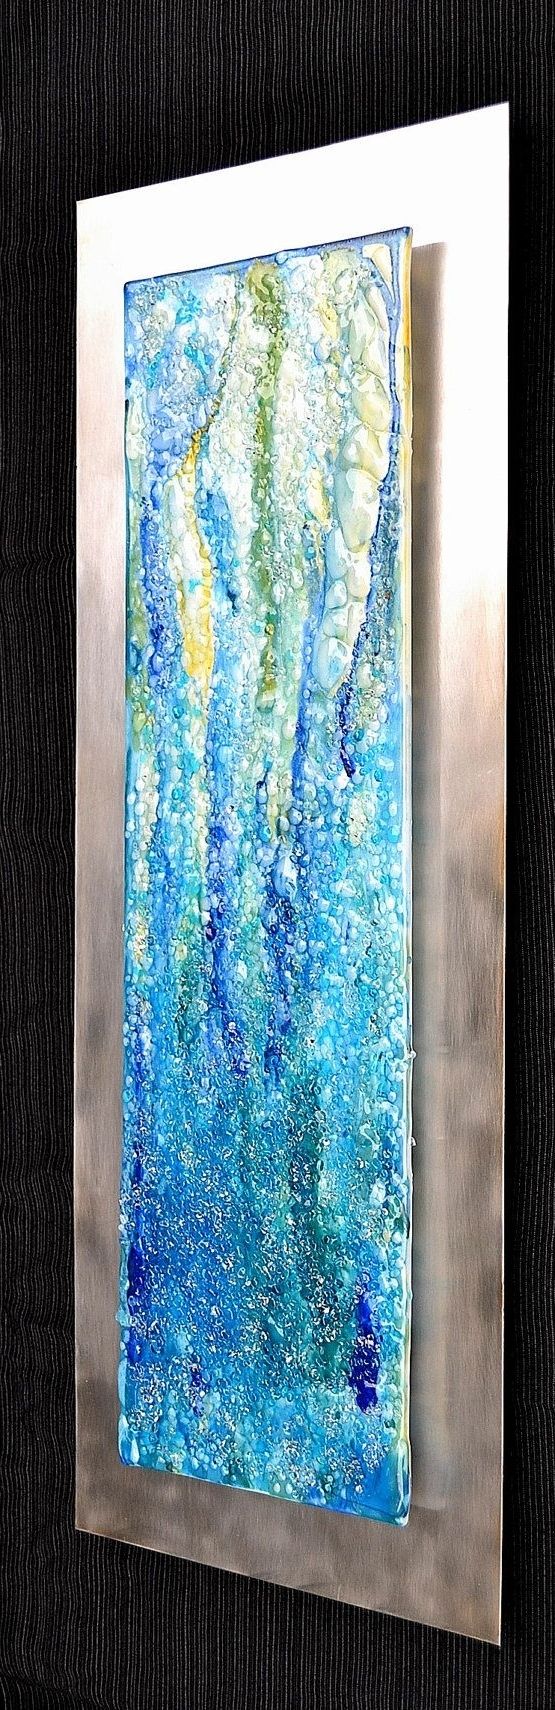 Best And Newest Contemporary Fused Glass Wall Art Regarding Waterfall – Modern Fused Glass Wall Hanging Art On Stainless Steel (View 3 of 15)